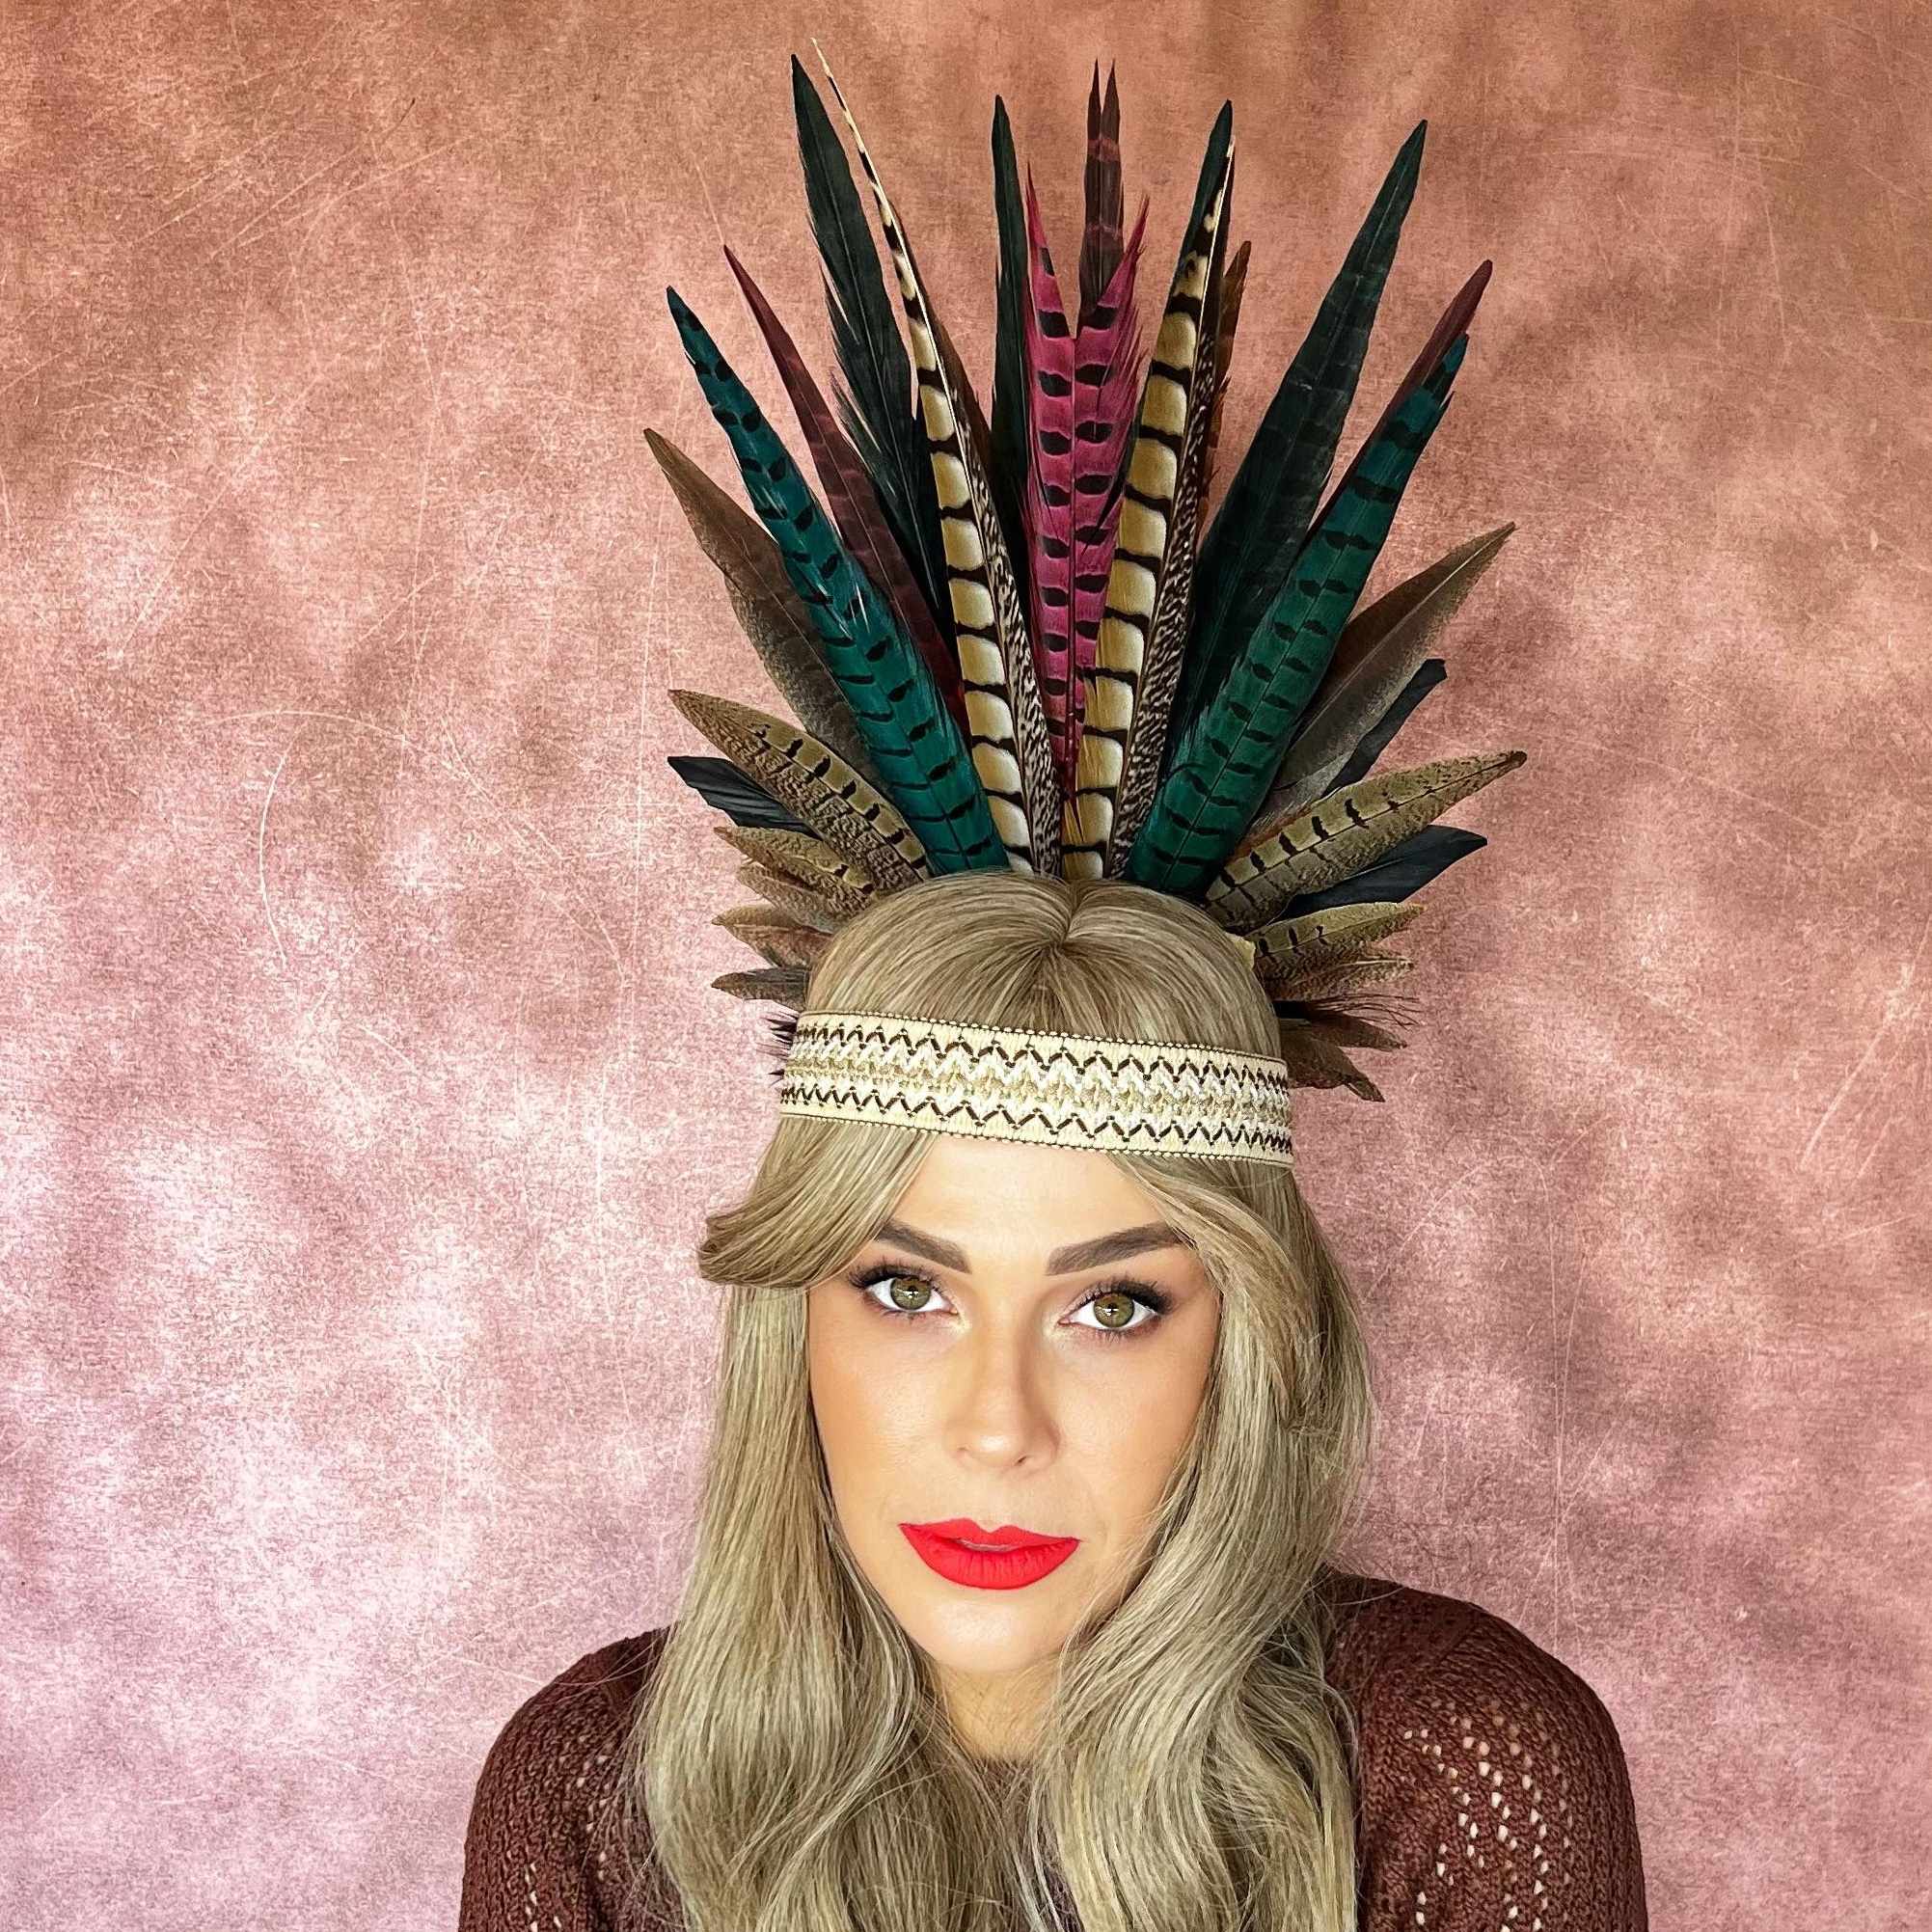 rock out the next festival in this stunning headpiece